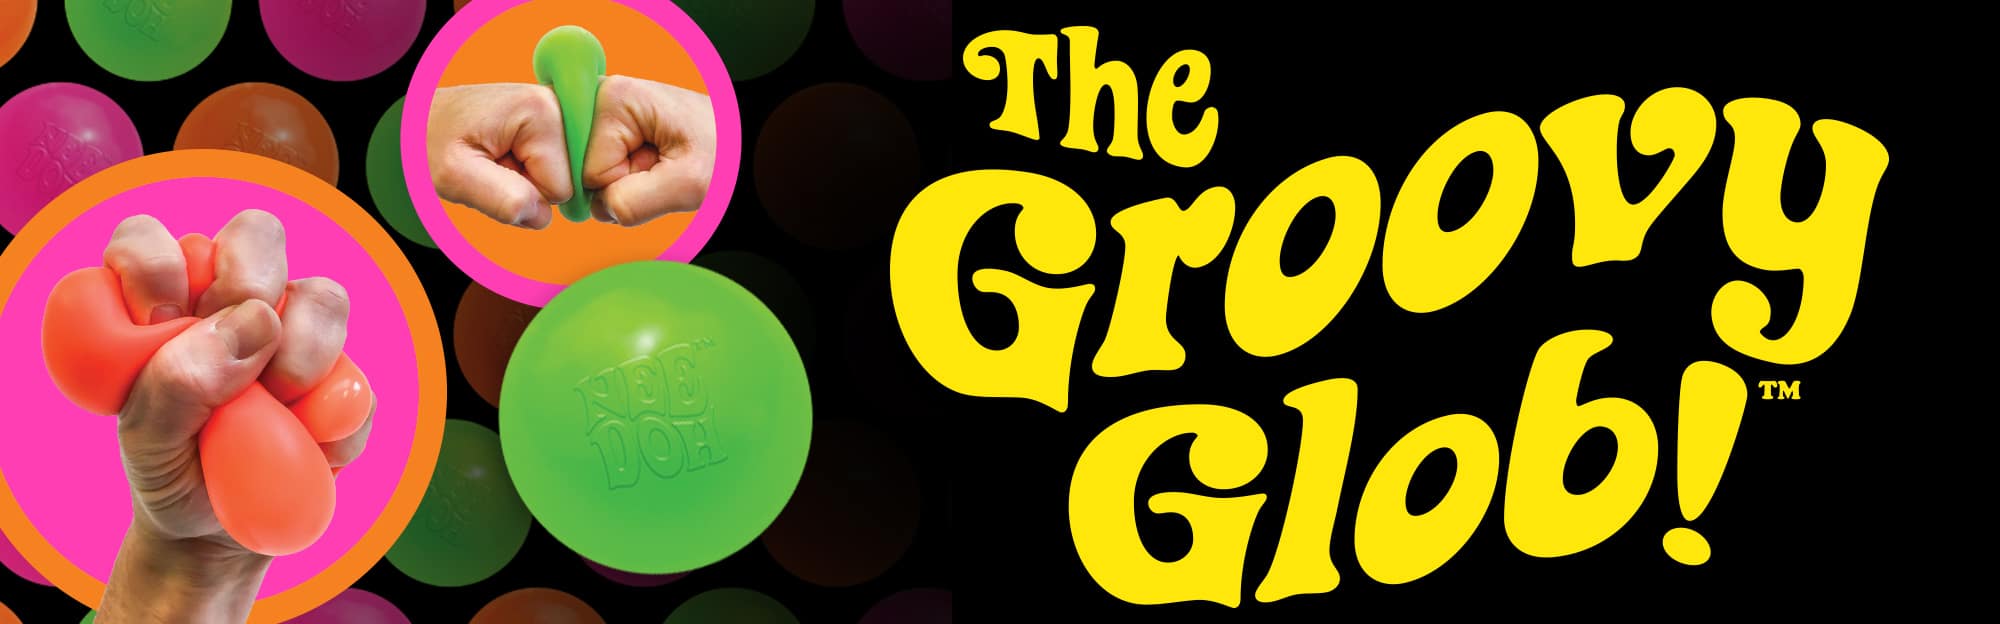 Nee Doh - The Groovy Glob - Hands Squeezing Green and Orange Nee Doh Ball